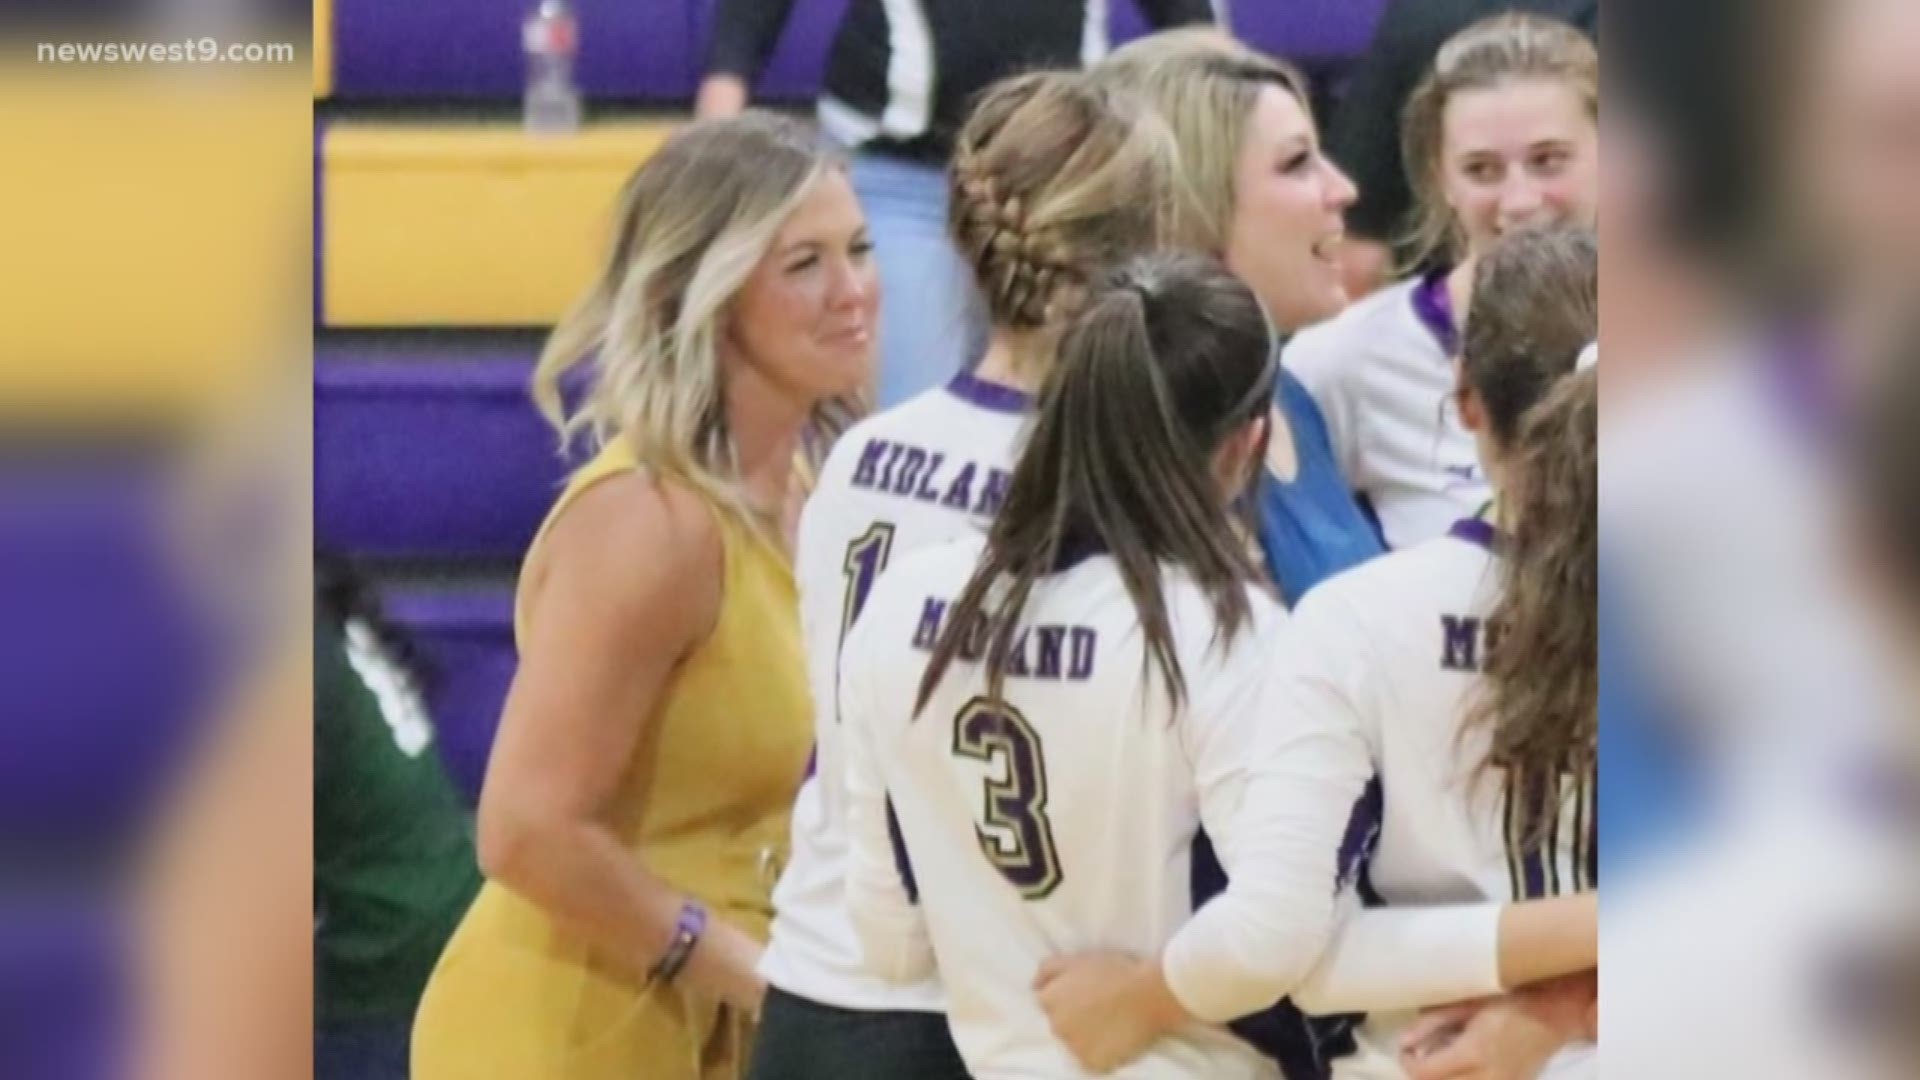 Lady Dawgs volleyball, track assistant coach and new Midland High head soccer coach, Taryn Parker, wants to leave a mark on her teams beyond the field.